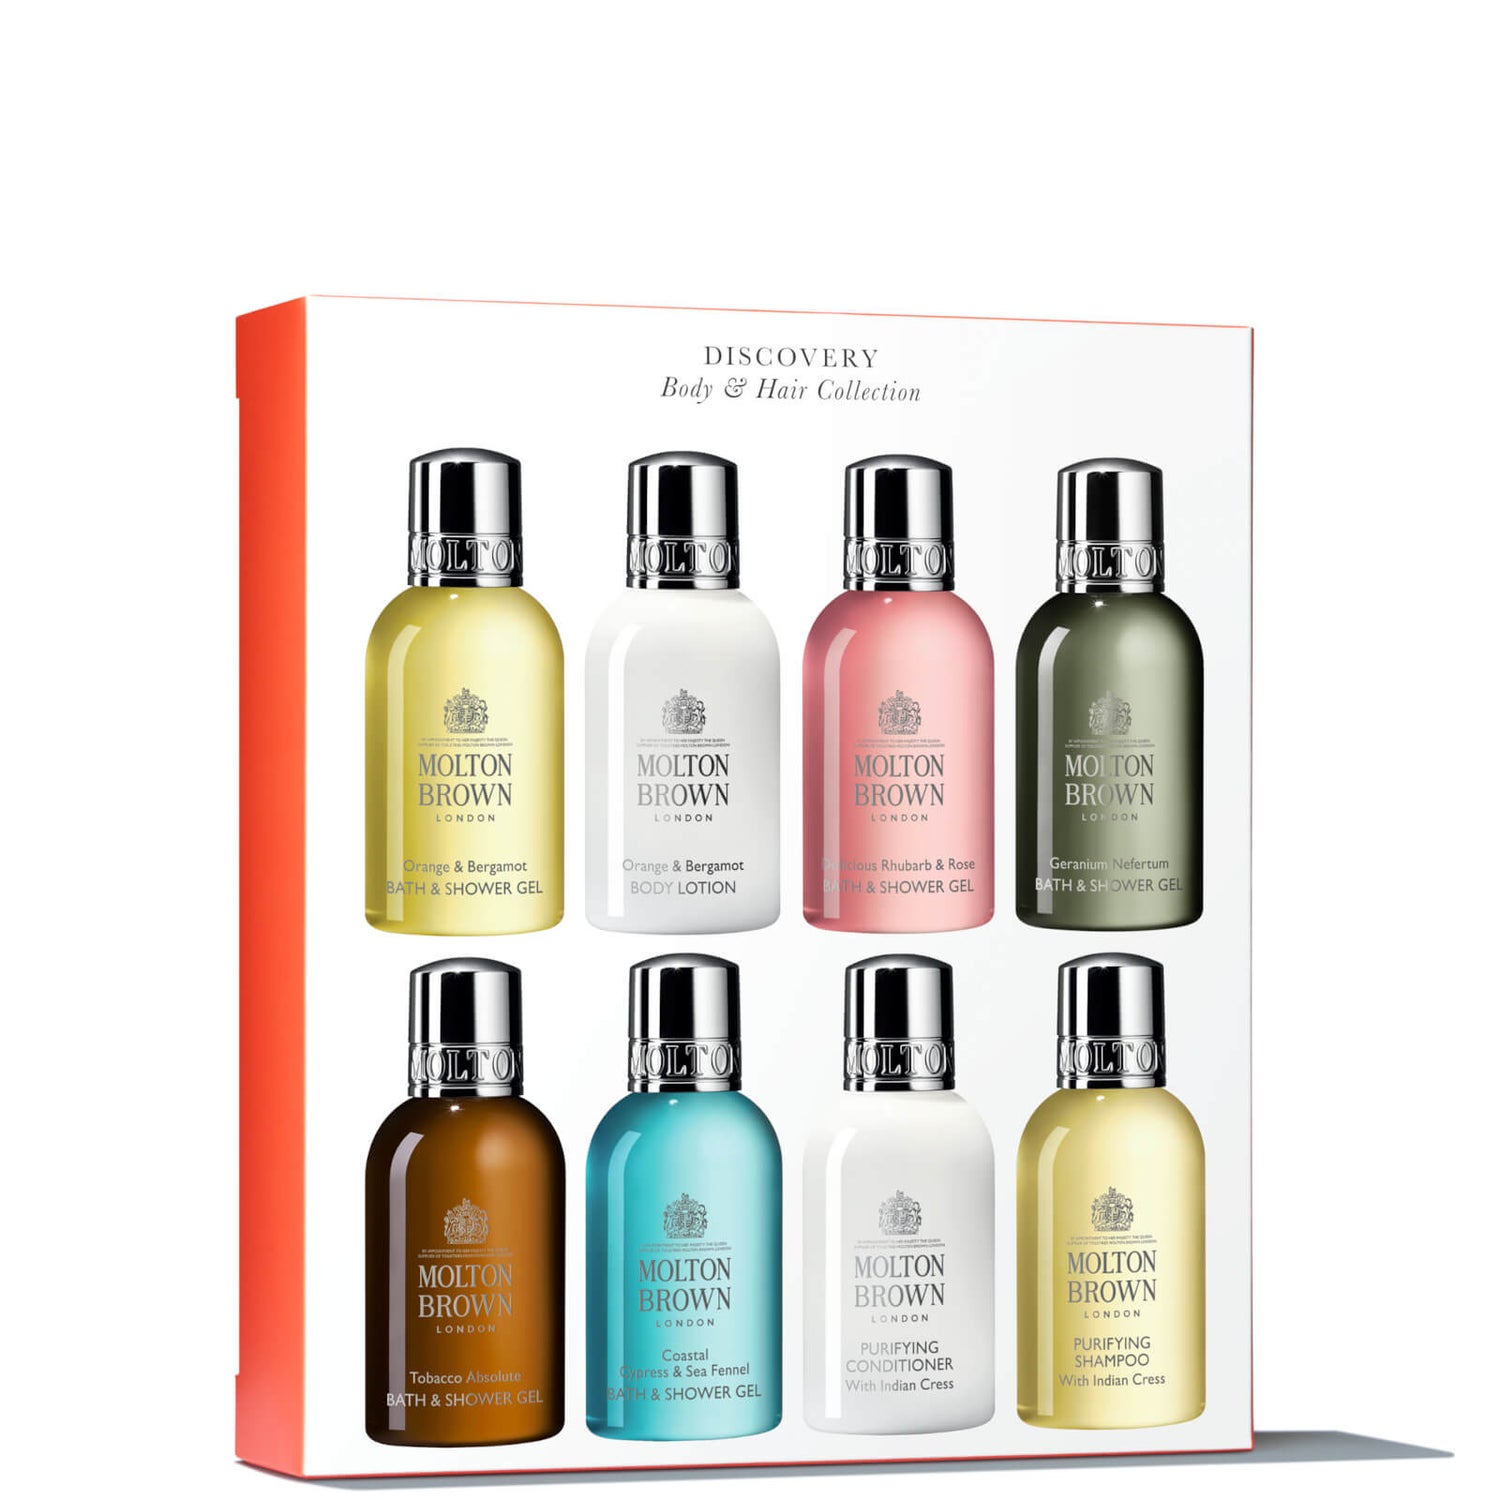 Molton Brown Discovery Body and Hair Gift Set (Worth £40.00)